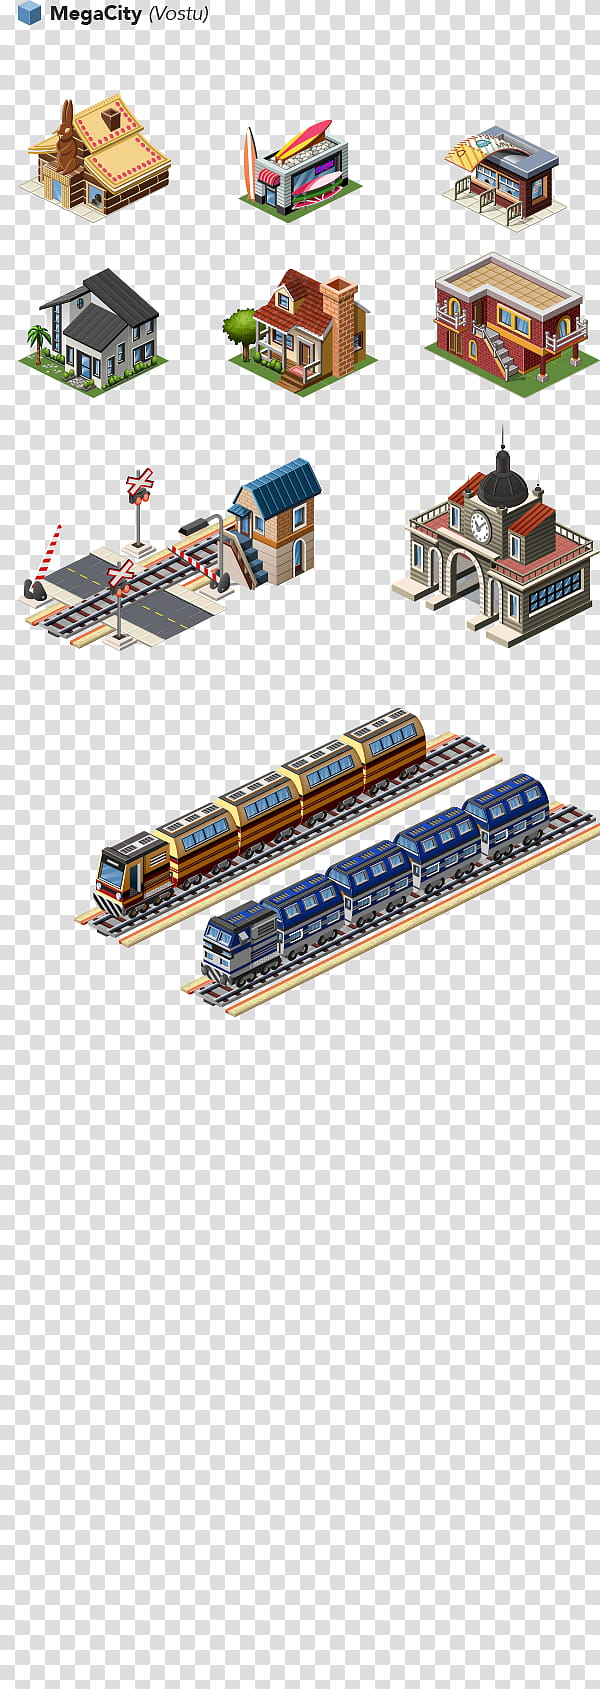 Train, Architecture, Isometric Projection, 3D Computer Graphics, Drawing, Pixel Art, 25d, Barcelona transparent background PNG clipart